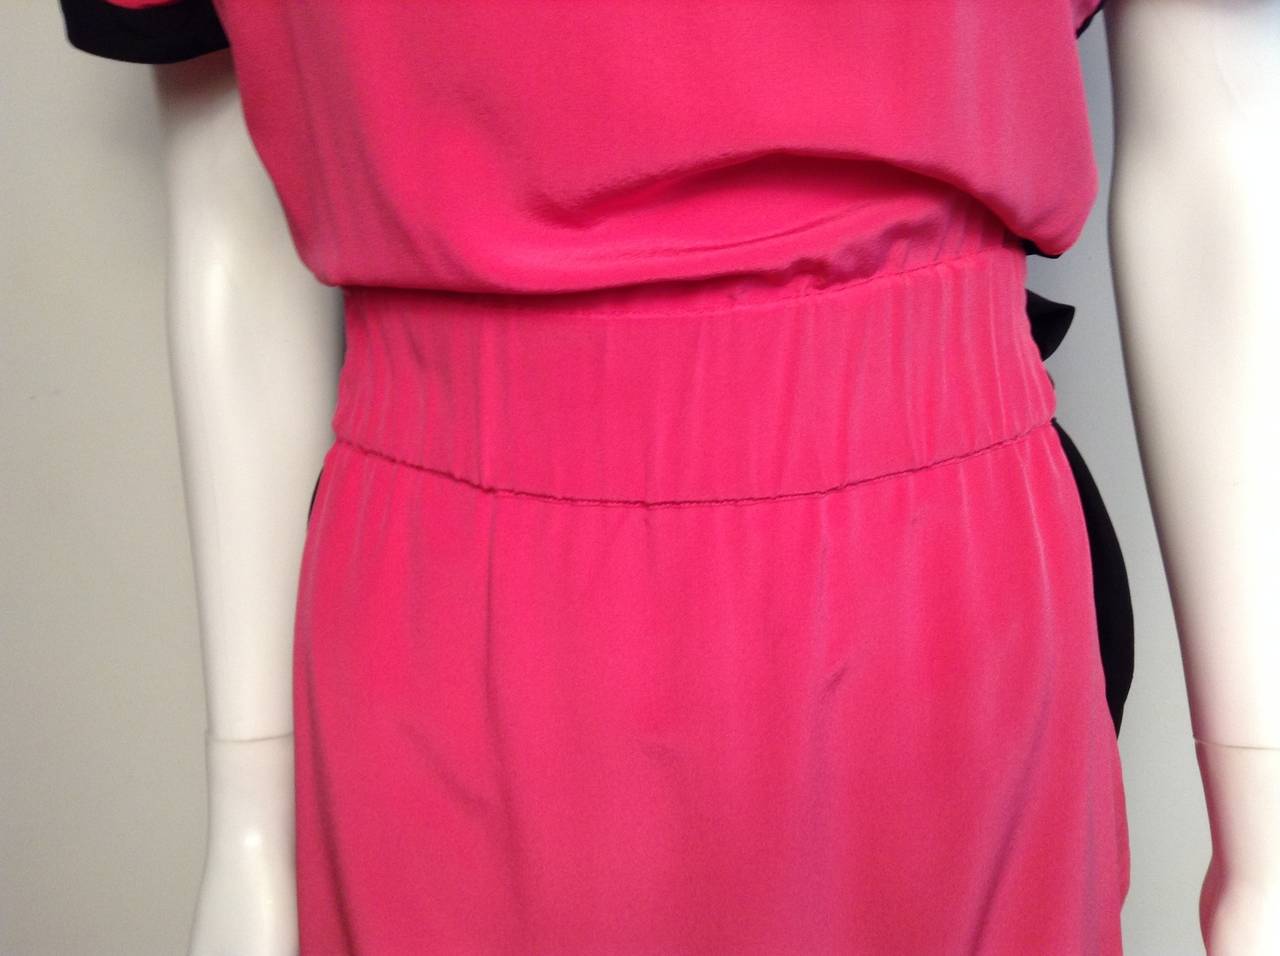 Women's Karl Lagerfeld Black and Pink Vintage Dress Size 8 For Sale